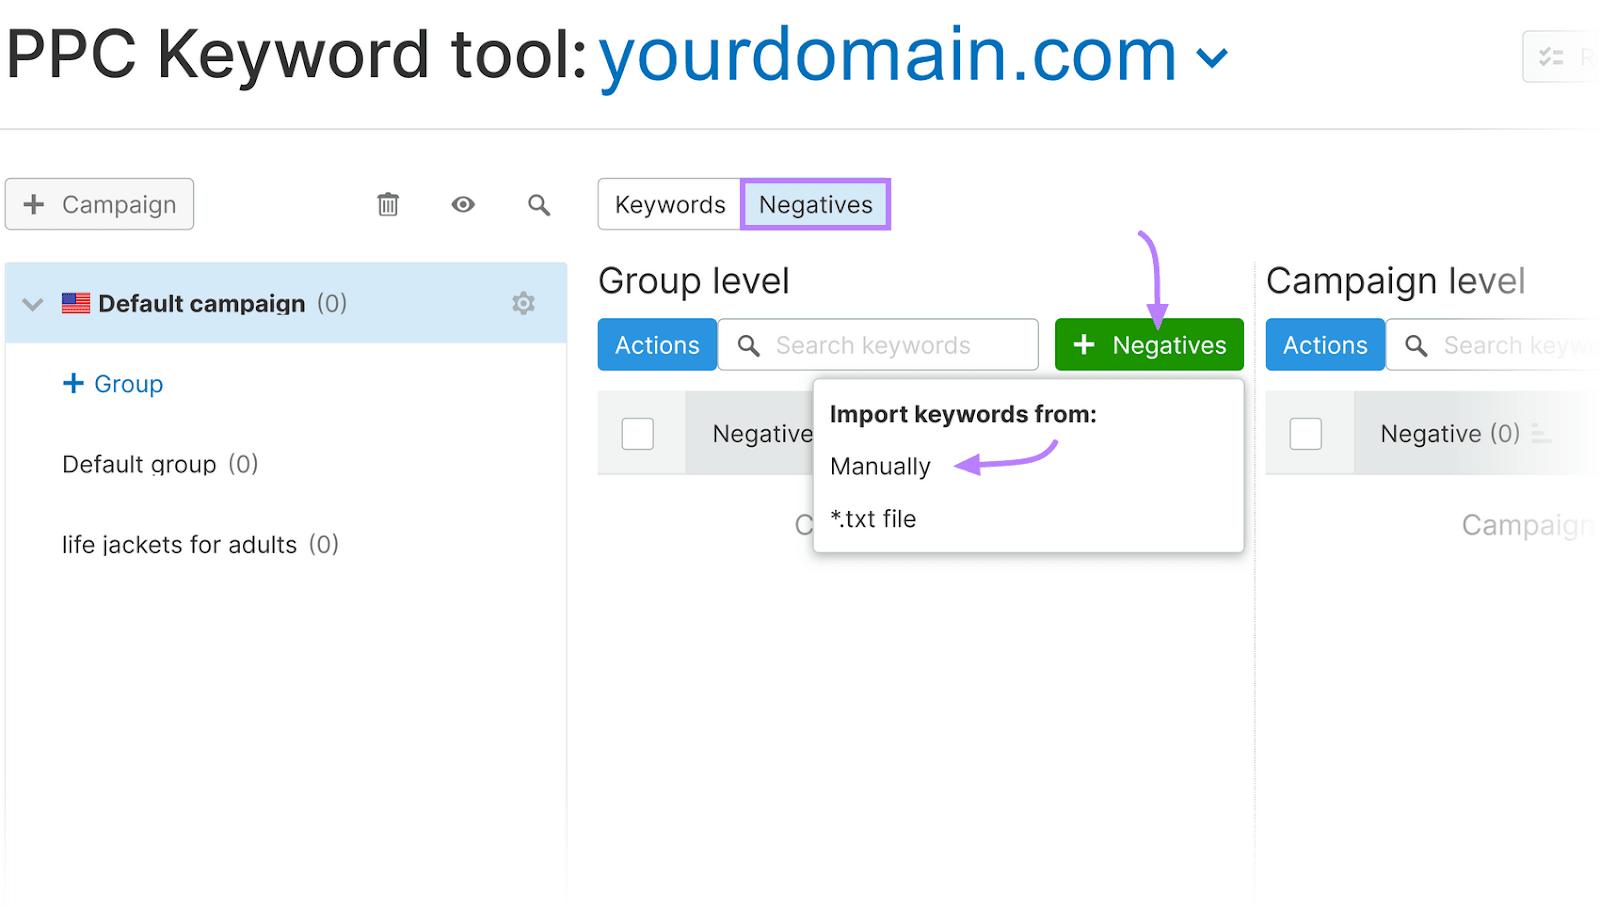 PPC Keyword Tool with options for adding negative keywords at group levels, and an option to import keywords manually.